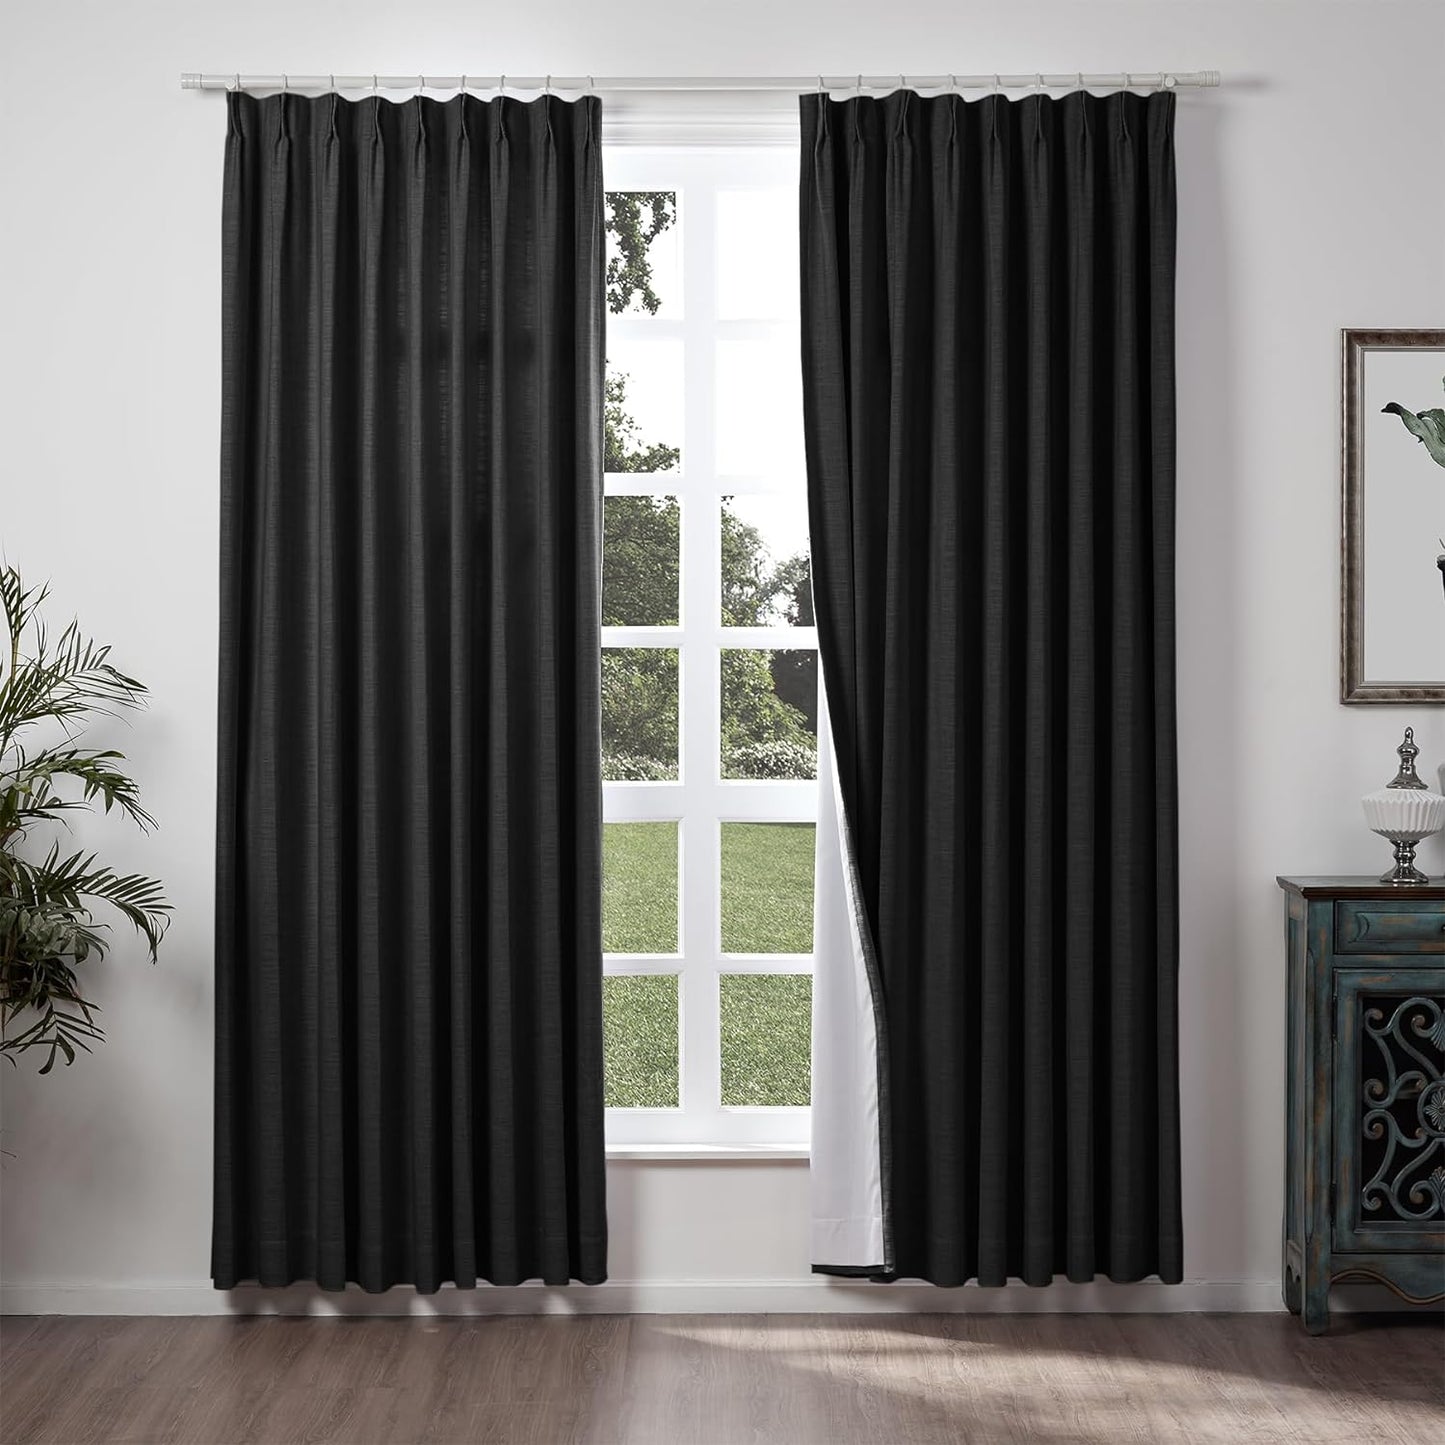 Chadmade 50" W X 63" L Polyester Linen Drape with Blackout Lining Pinch Pleat Curtain for Sliding Door Patio Door Living Room Bedroom, (1 Panel) Sand Beige Tallis Collection  ChadMade Black(37) 72Wx84L 